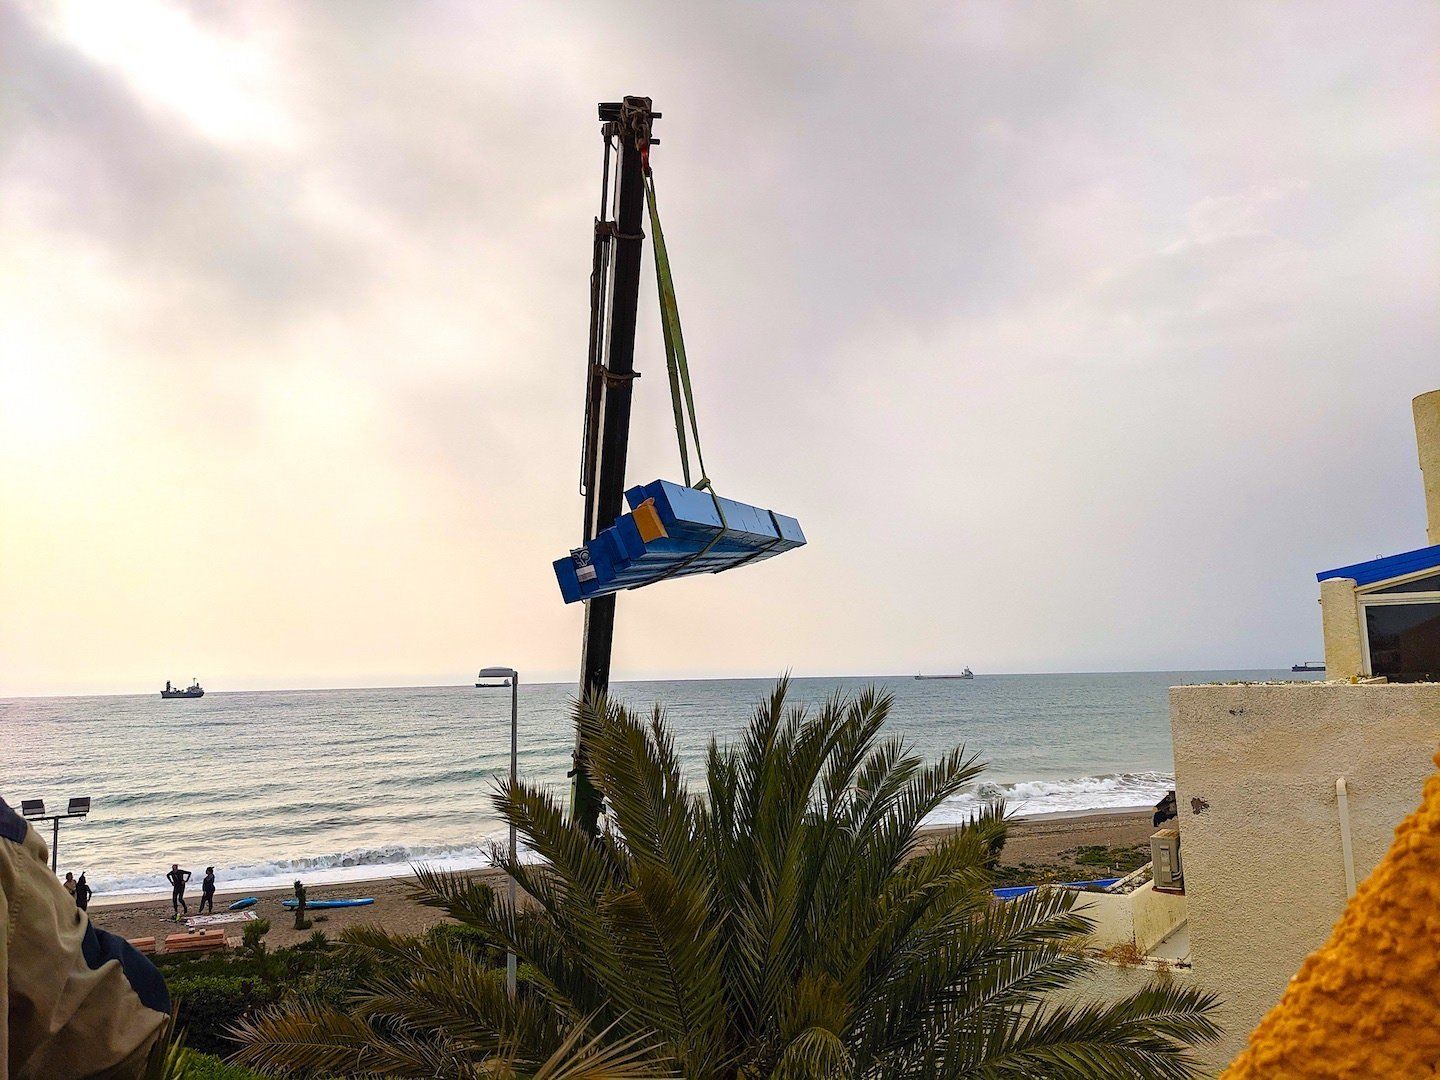 an arm of a crane hoists a load in the air and the sea is in the background